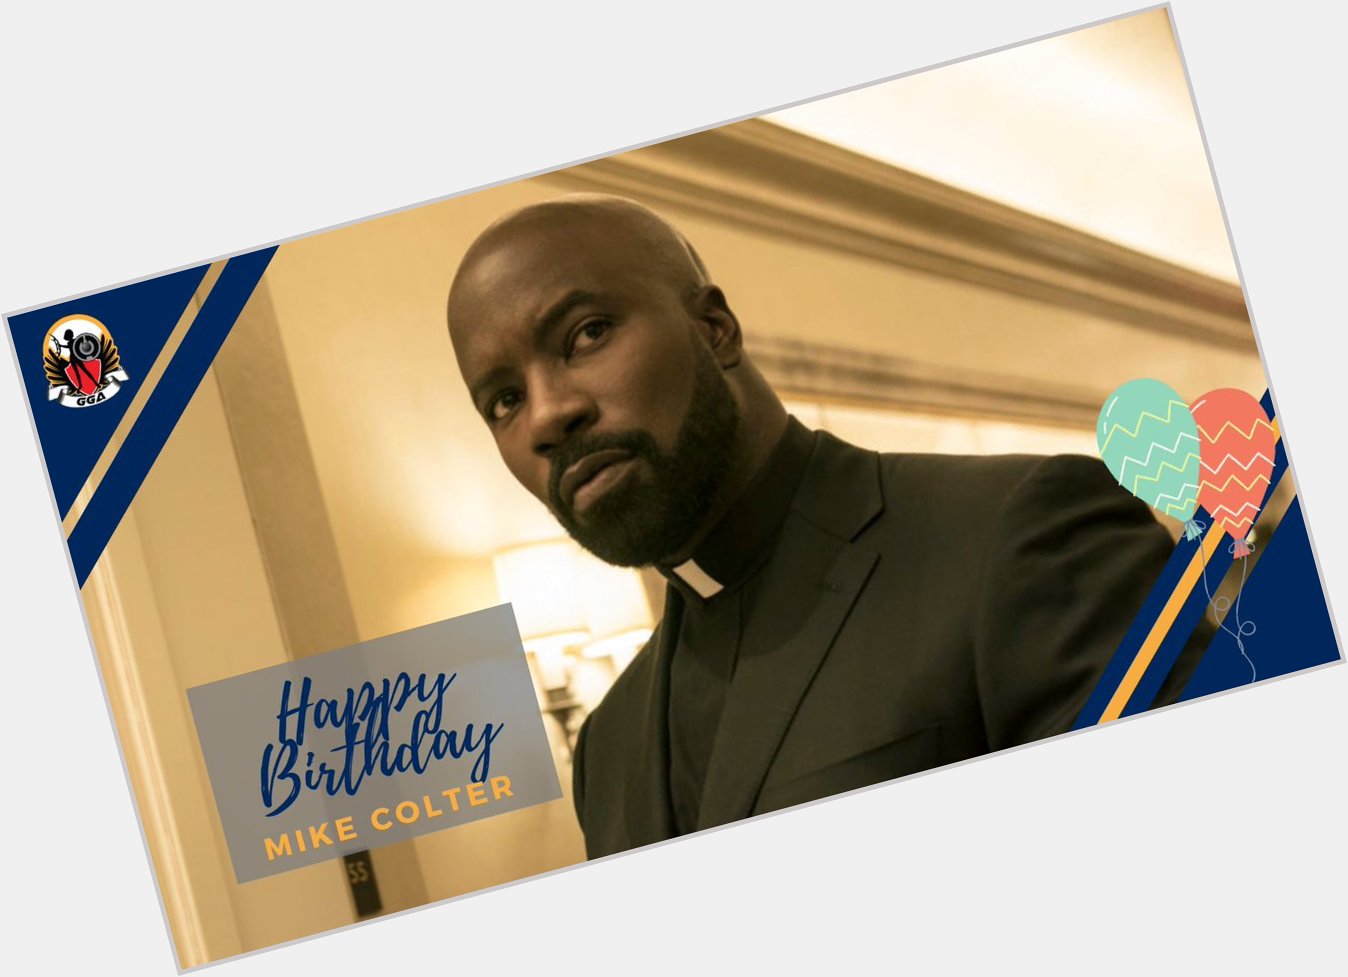 Happy Birthday to Mike Colter, a.k.a. David Acosta, a.k.a. Luke Cage!  